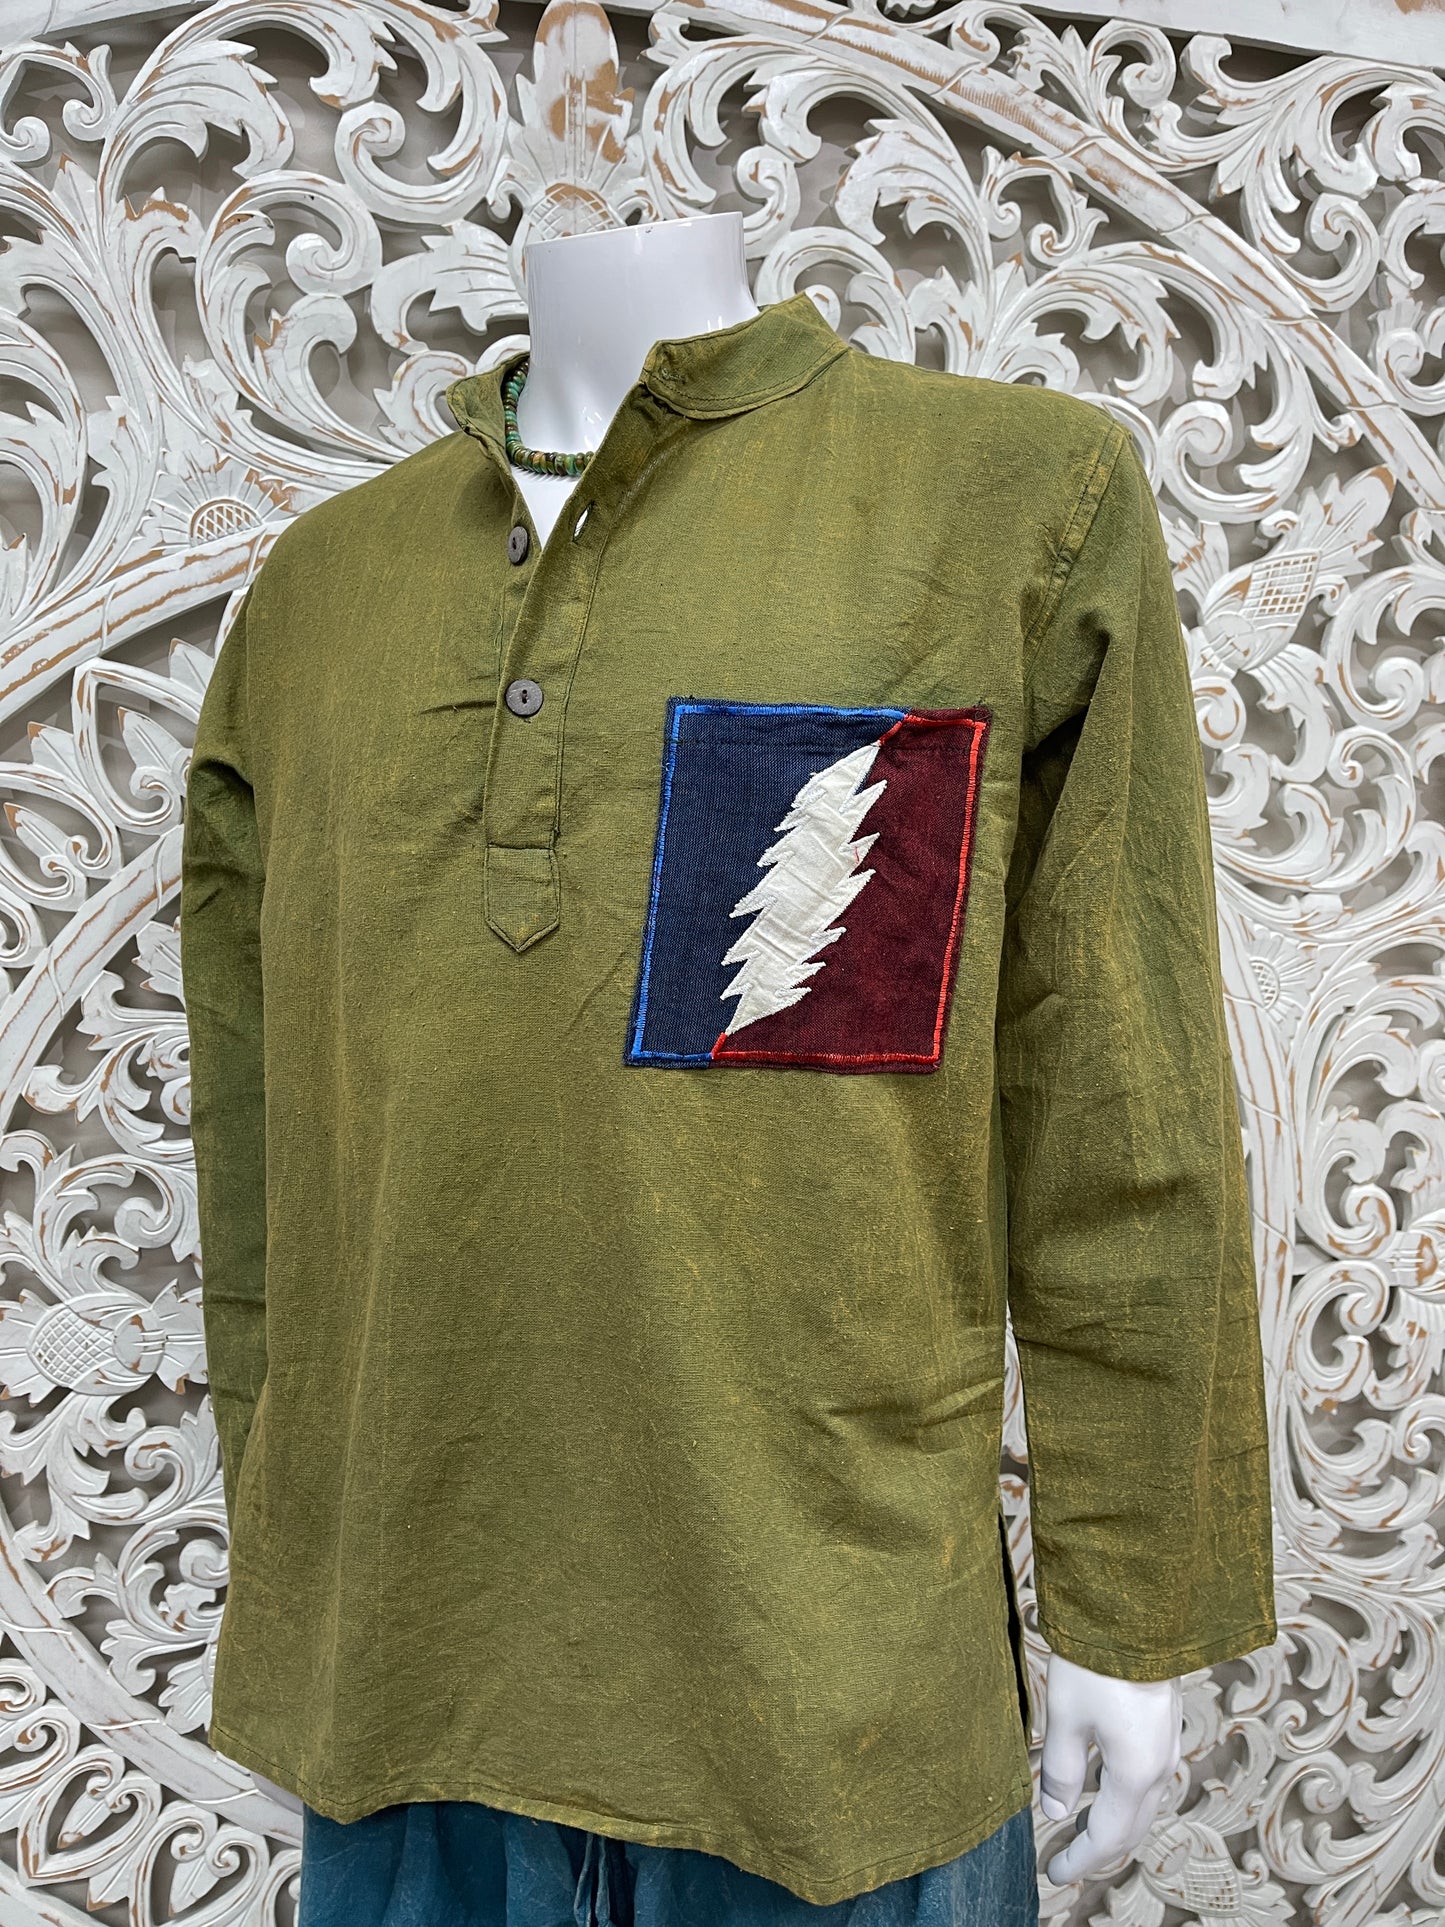 Cotton Lightning Bolt Shirts- Hidden Pockets  Available in 3 Colors